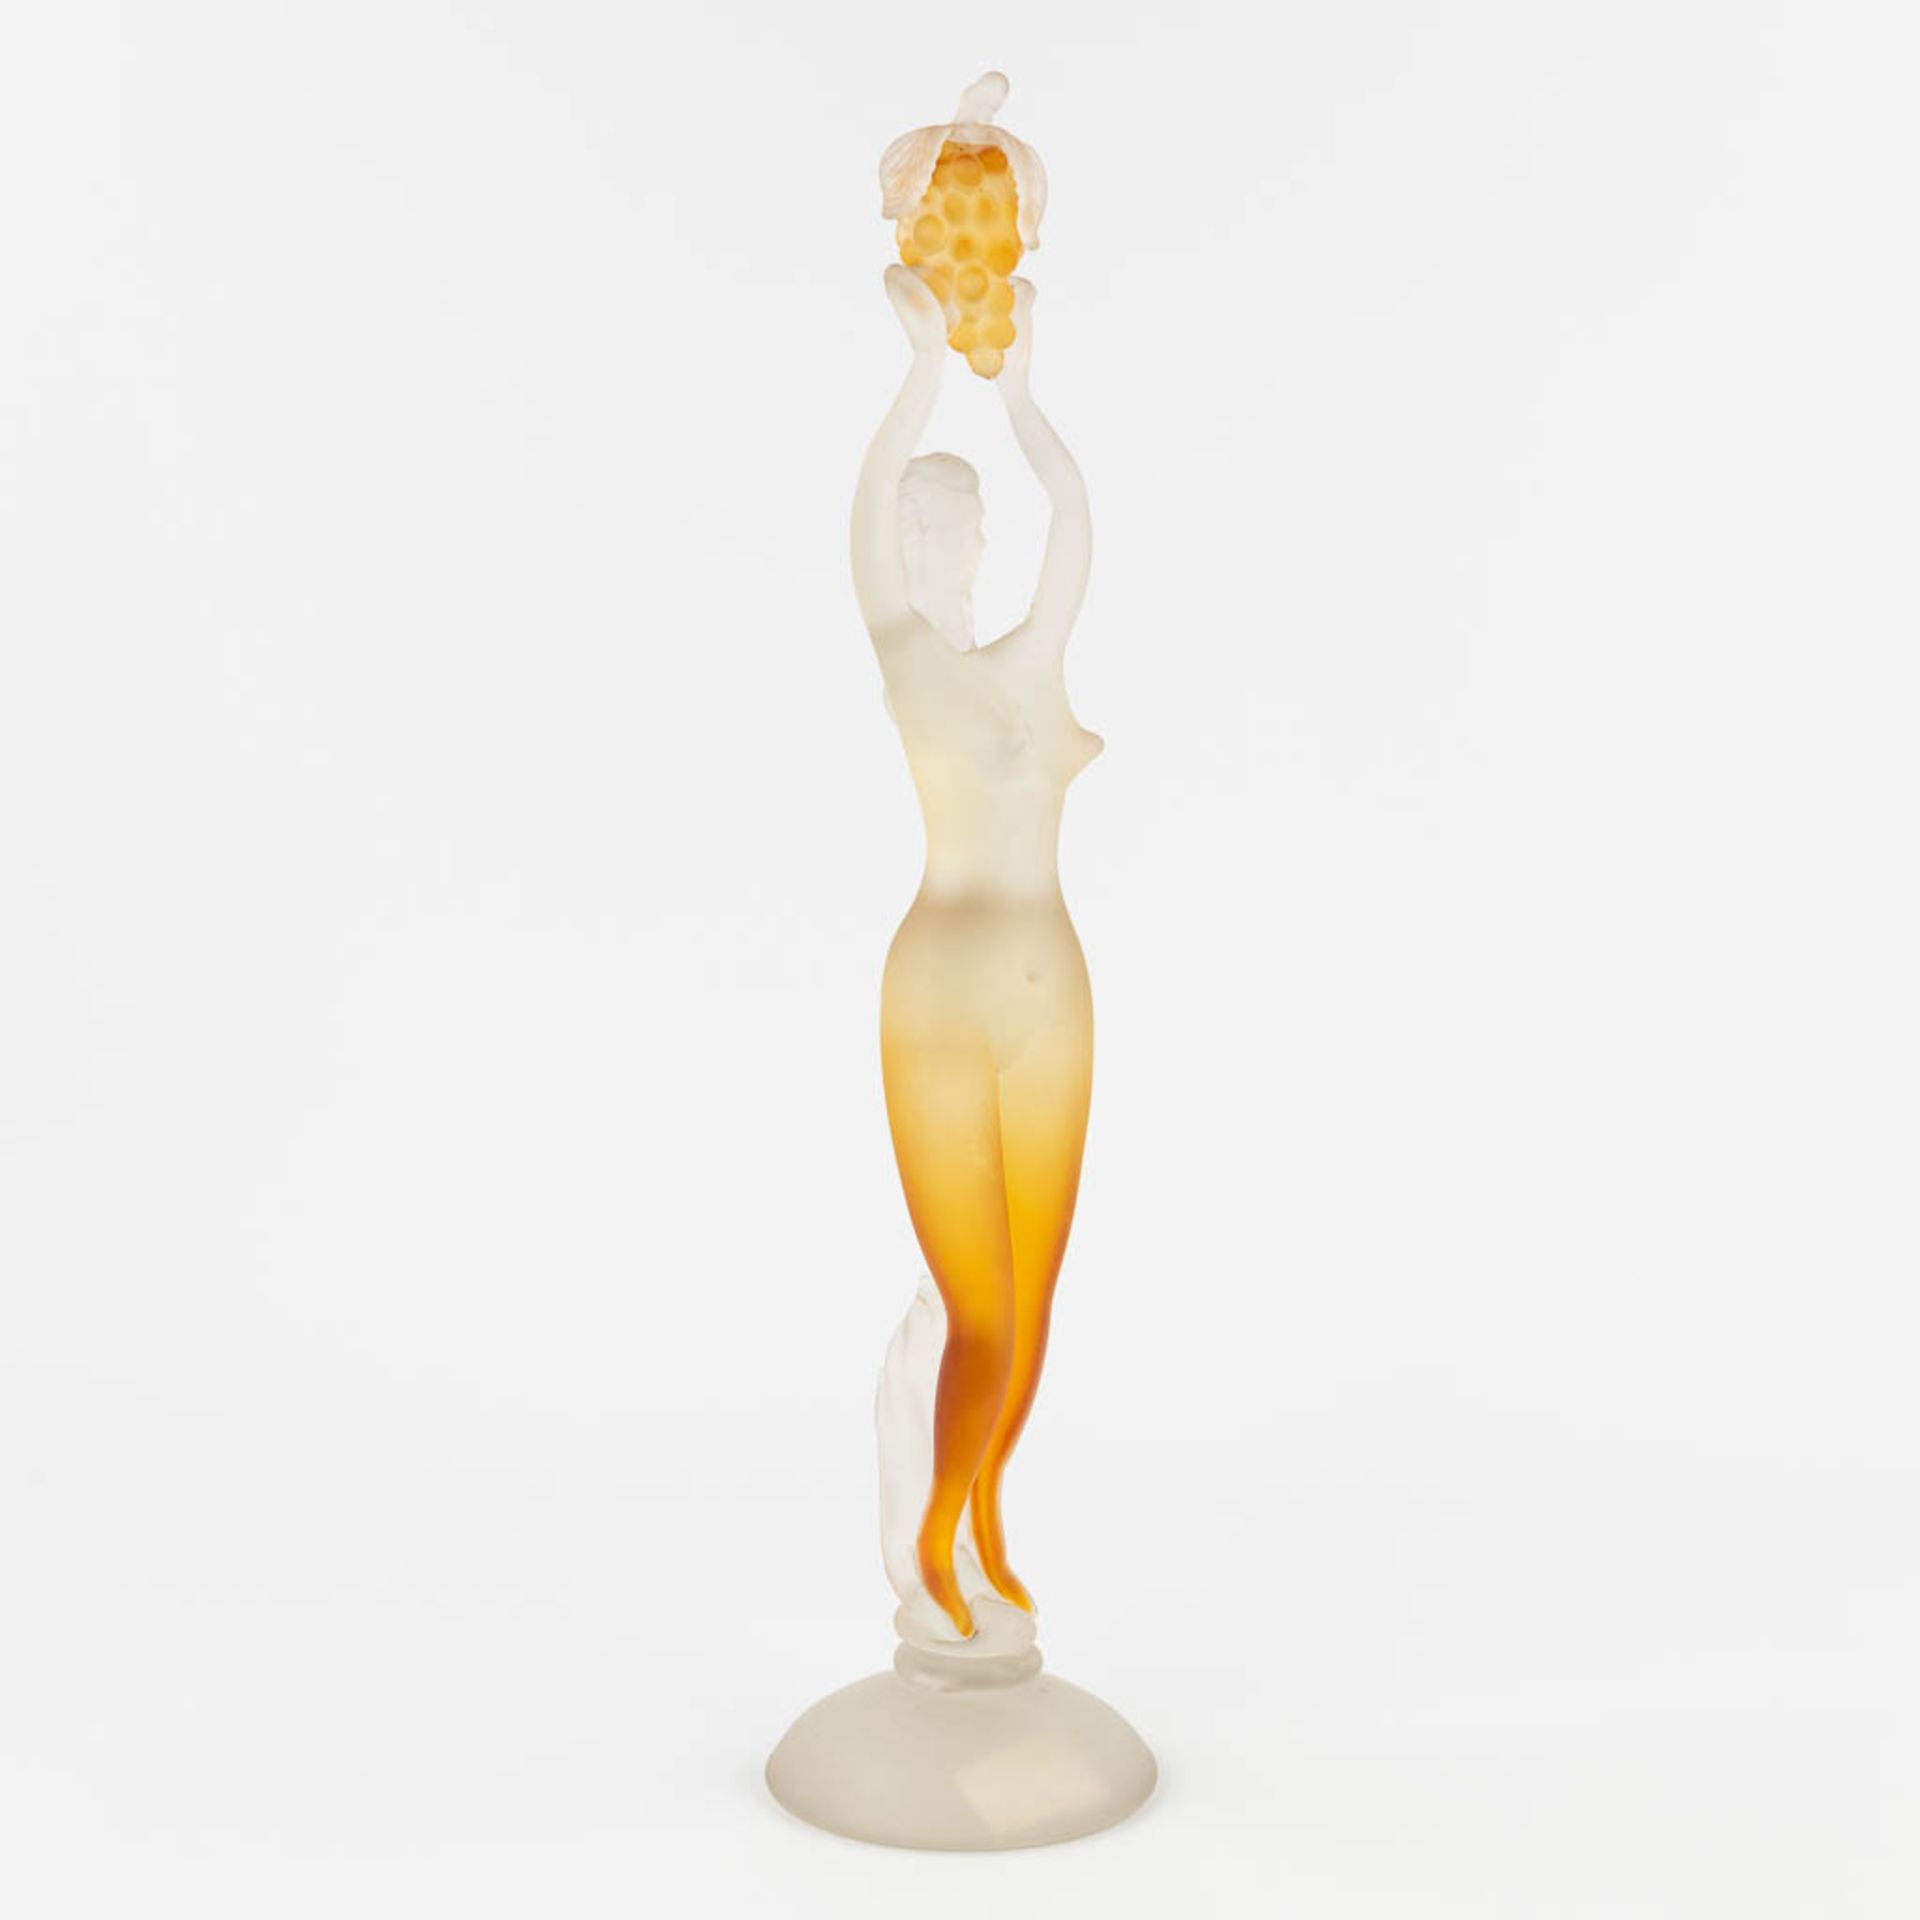 A female figurine holding grapes, Blown Glass, Murano Italy. (H: 50 x D: 11,5 cm) - Image 3 of 13